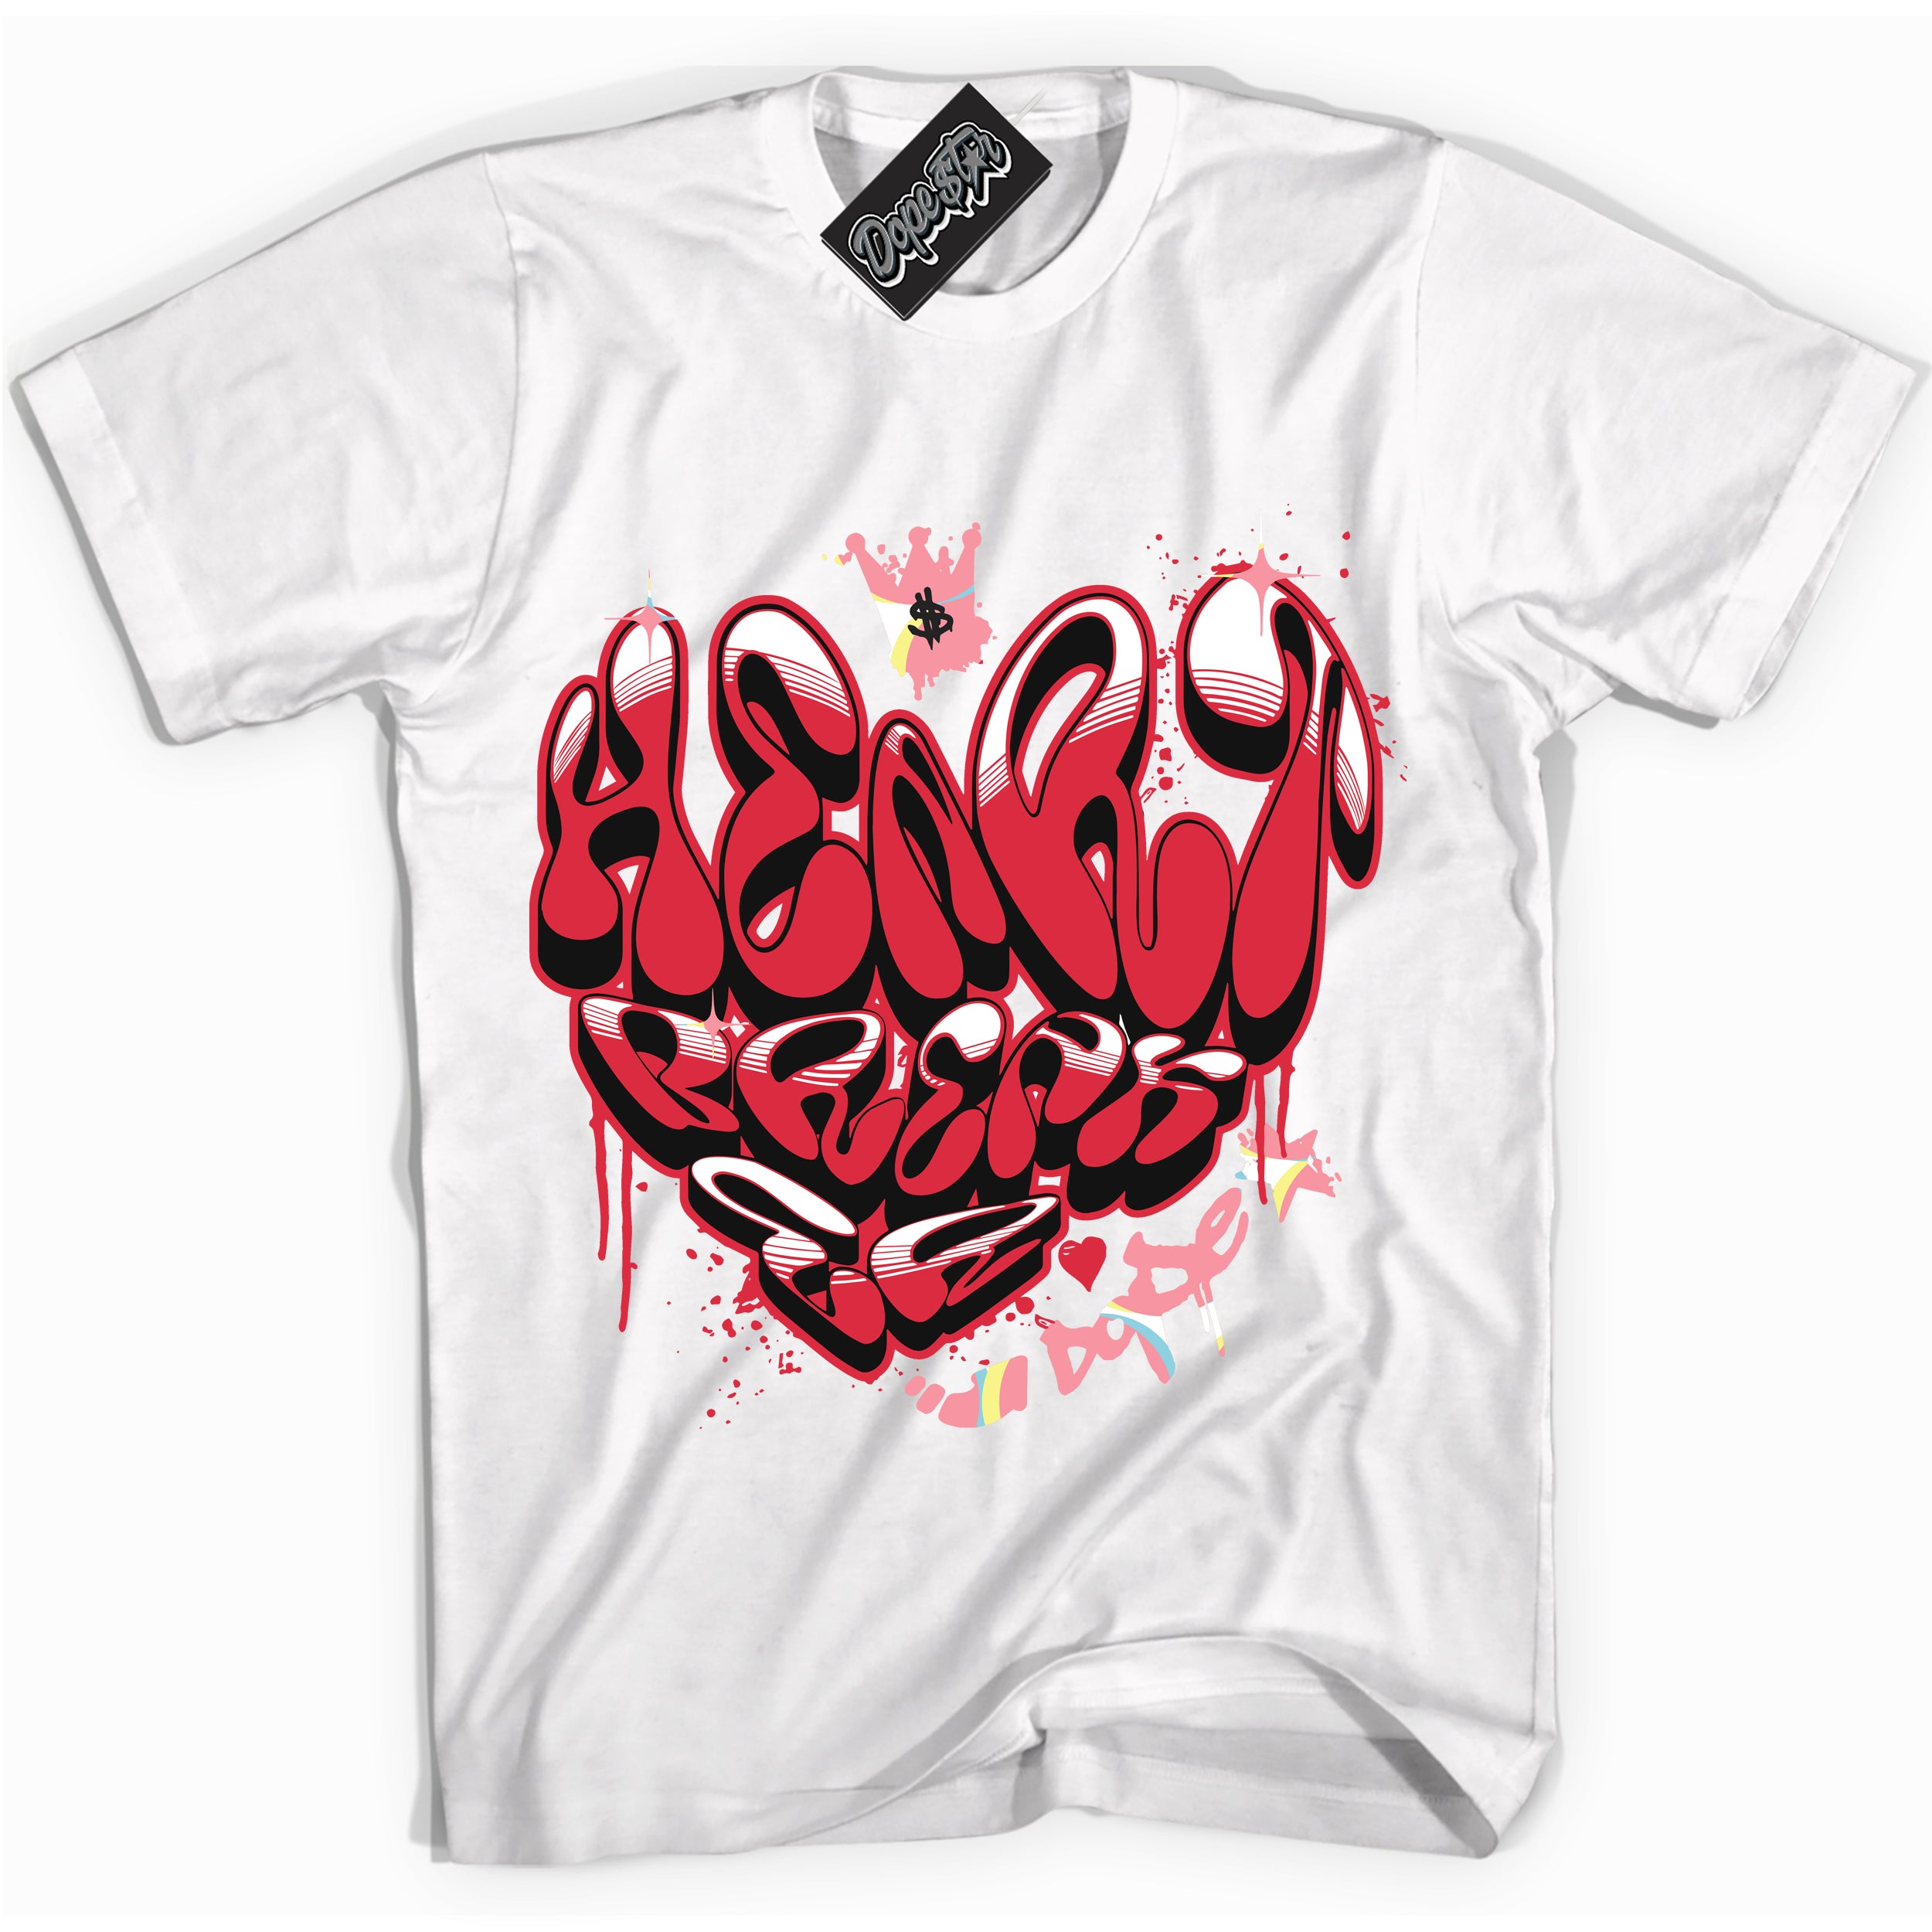 Cool White graphic tee with “ Heartbreaker Graffiti ” design, that perfectly matches Spider-Verse 1s sneakers 